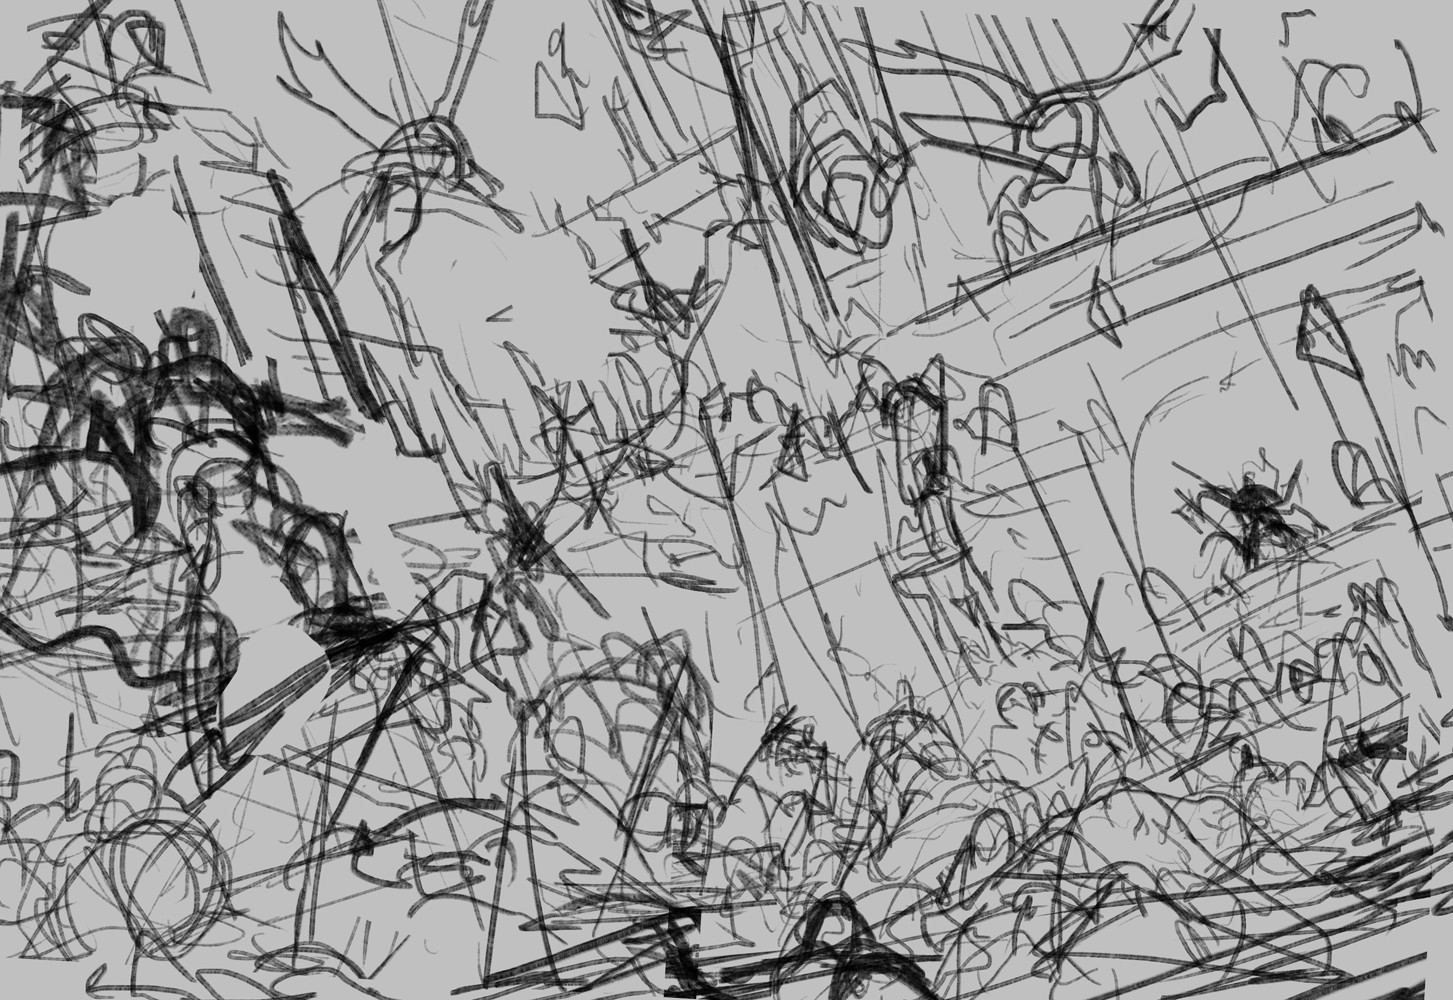 my process is never pretty...especially with battle scenes, 1st attempt on the comp idea i have, i always start with either scribbles, or just siluets, oh and i usually make sounds when im drawing like this 